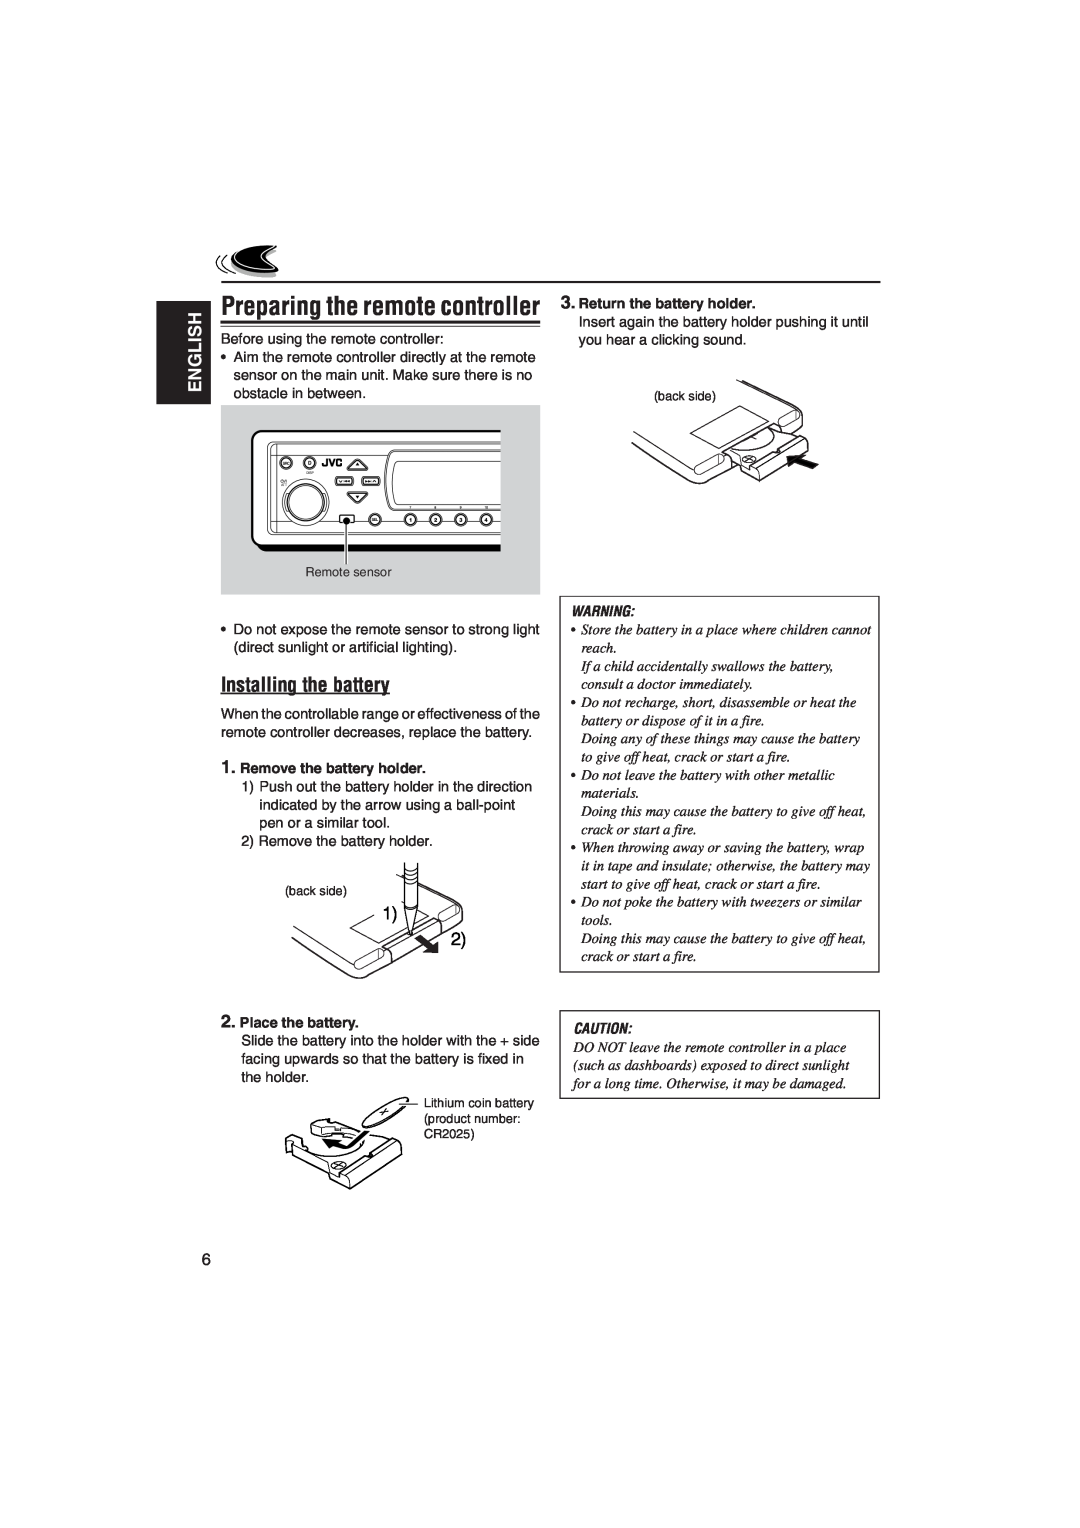 JVC KD-SH9105 manual Preparing the remote controller, Installing the battery, English, Return the battery holder 